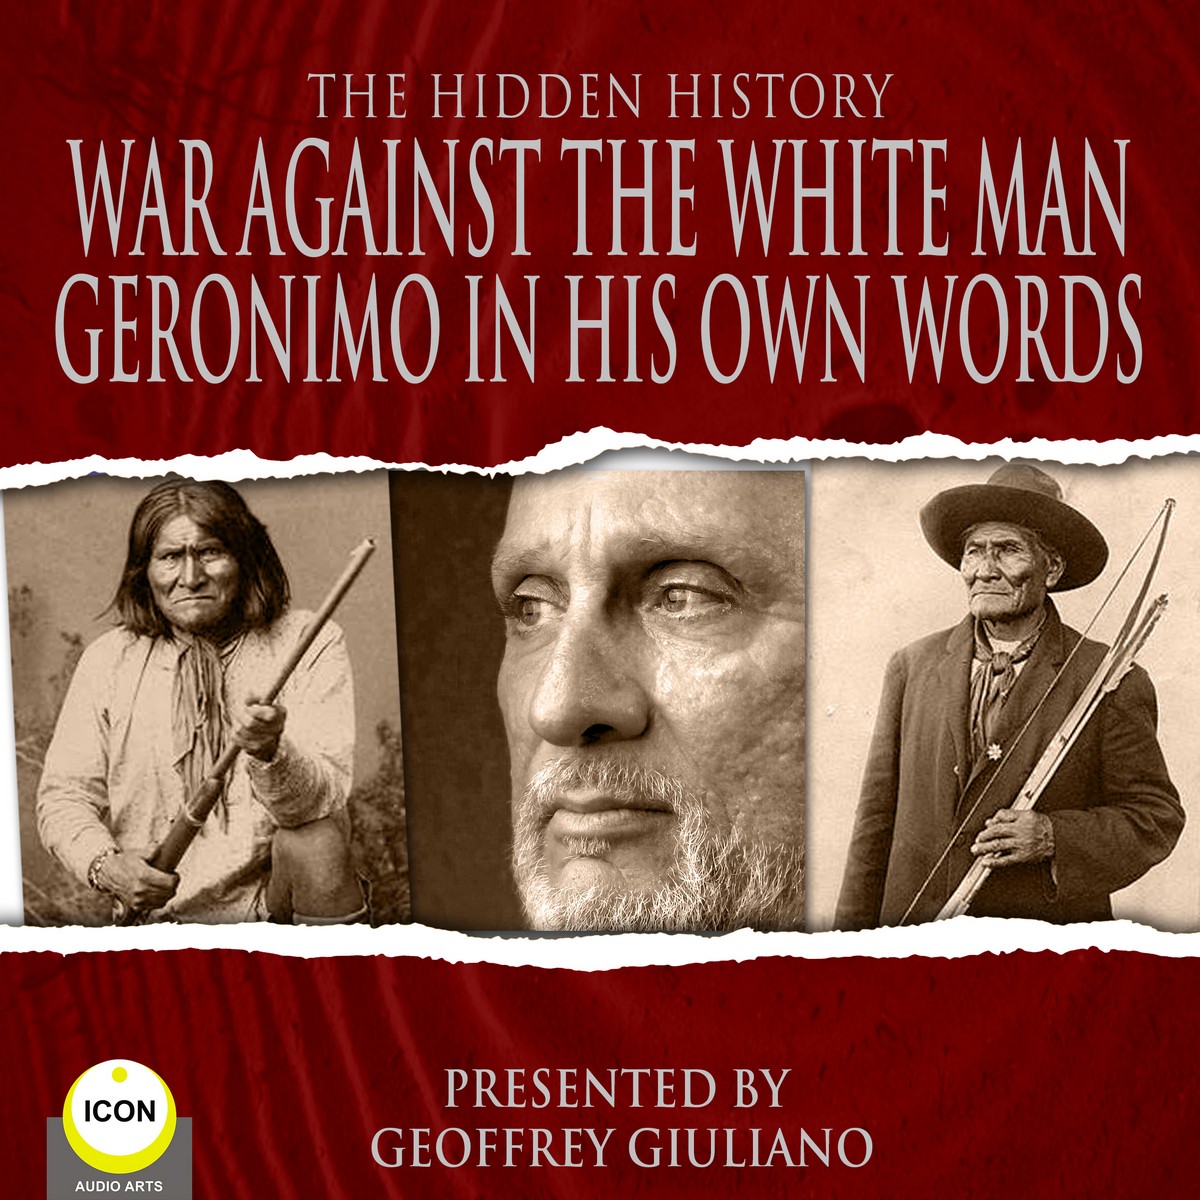 War Against The White Man – Geronimo The Hidden History